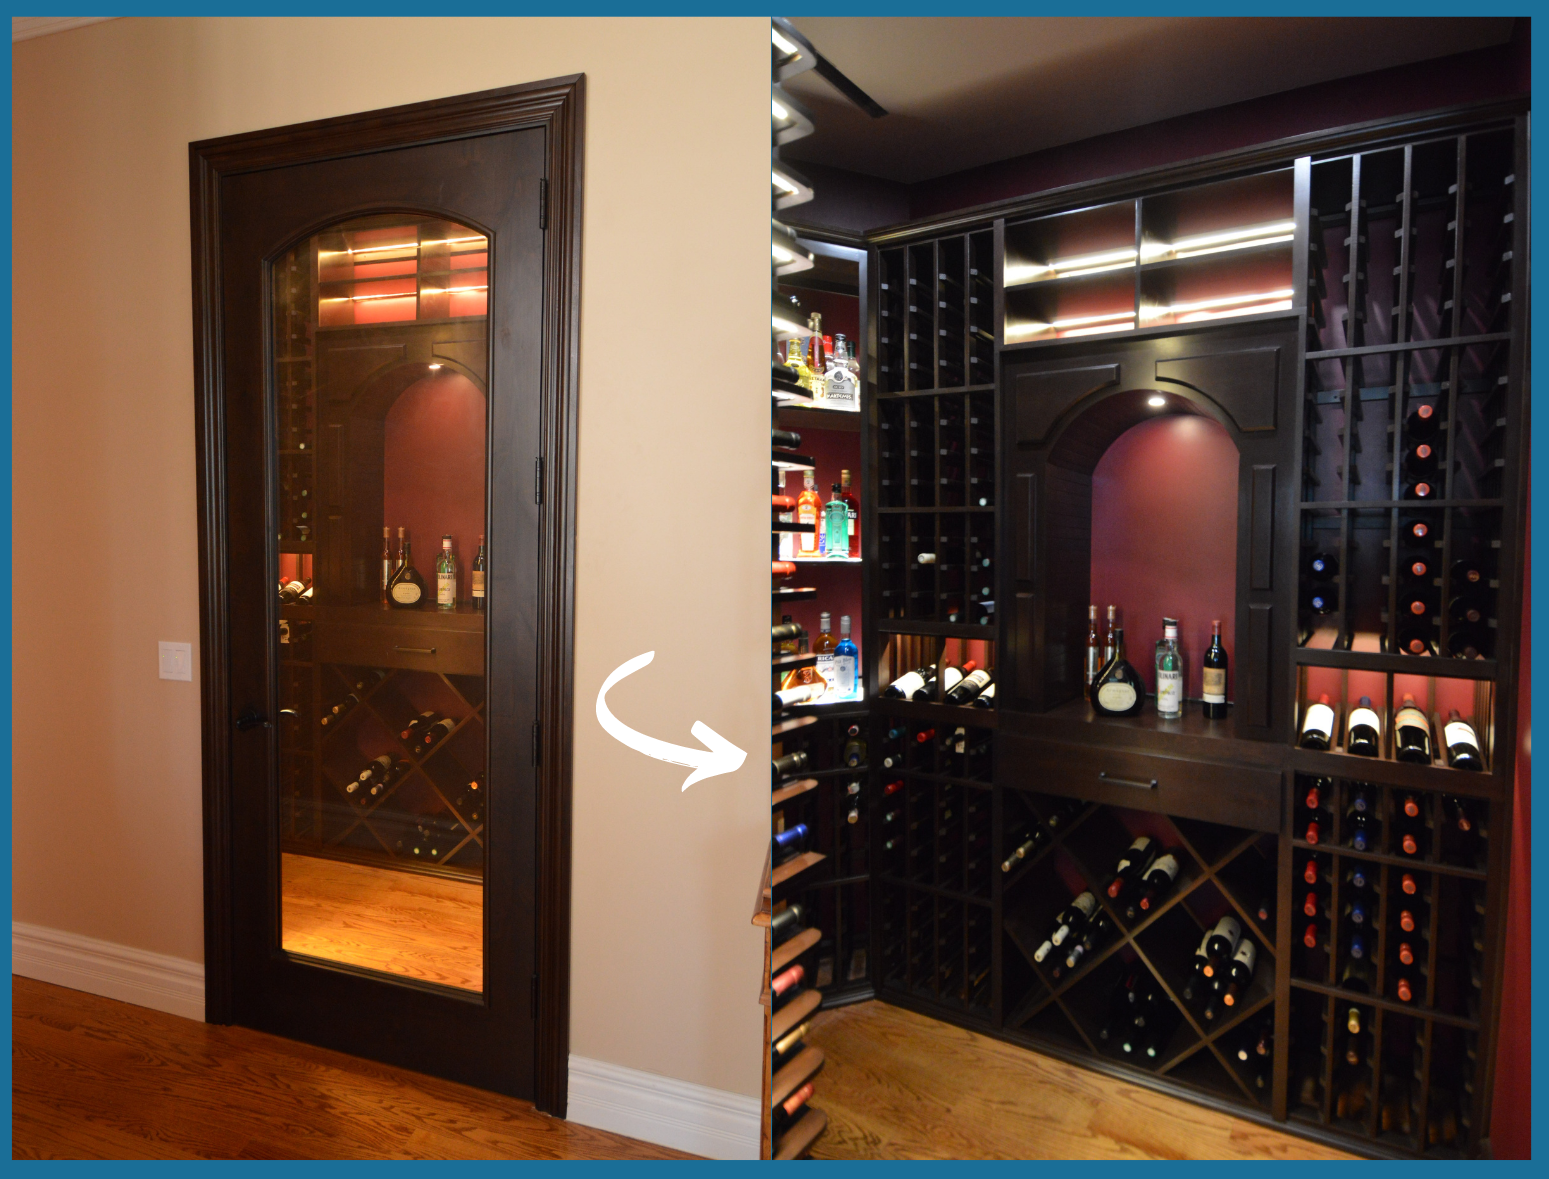 This Barolo Door is Custom-Designed To Secure and Protect the Refrigerated Wine Cellar